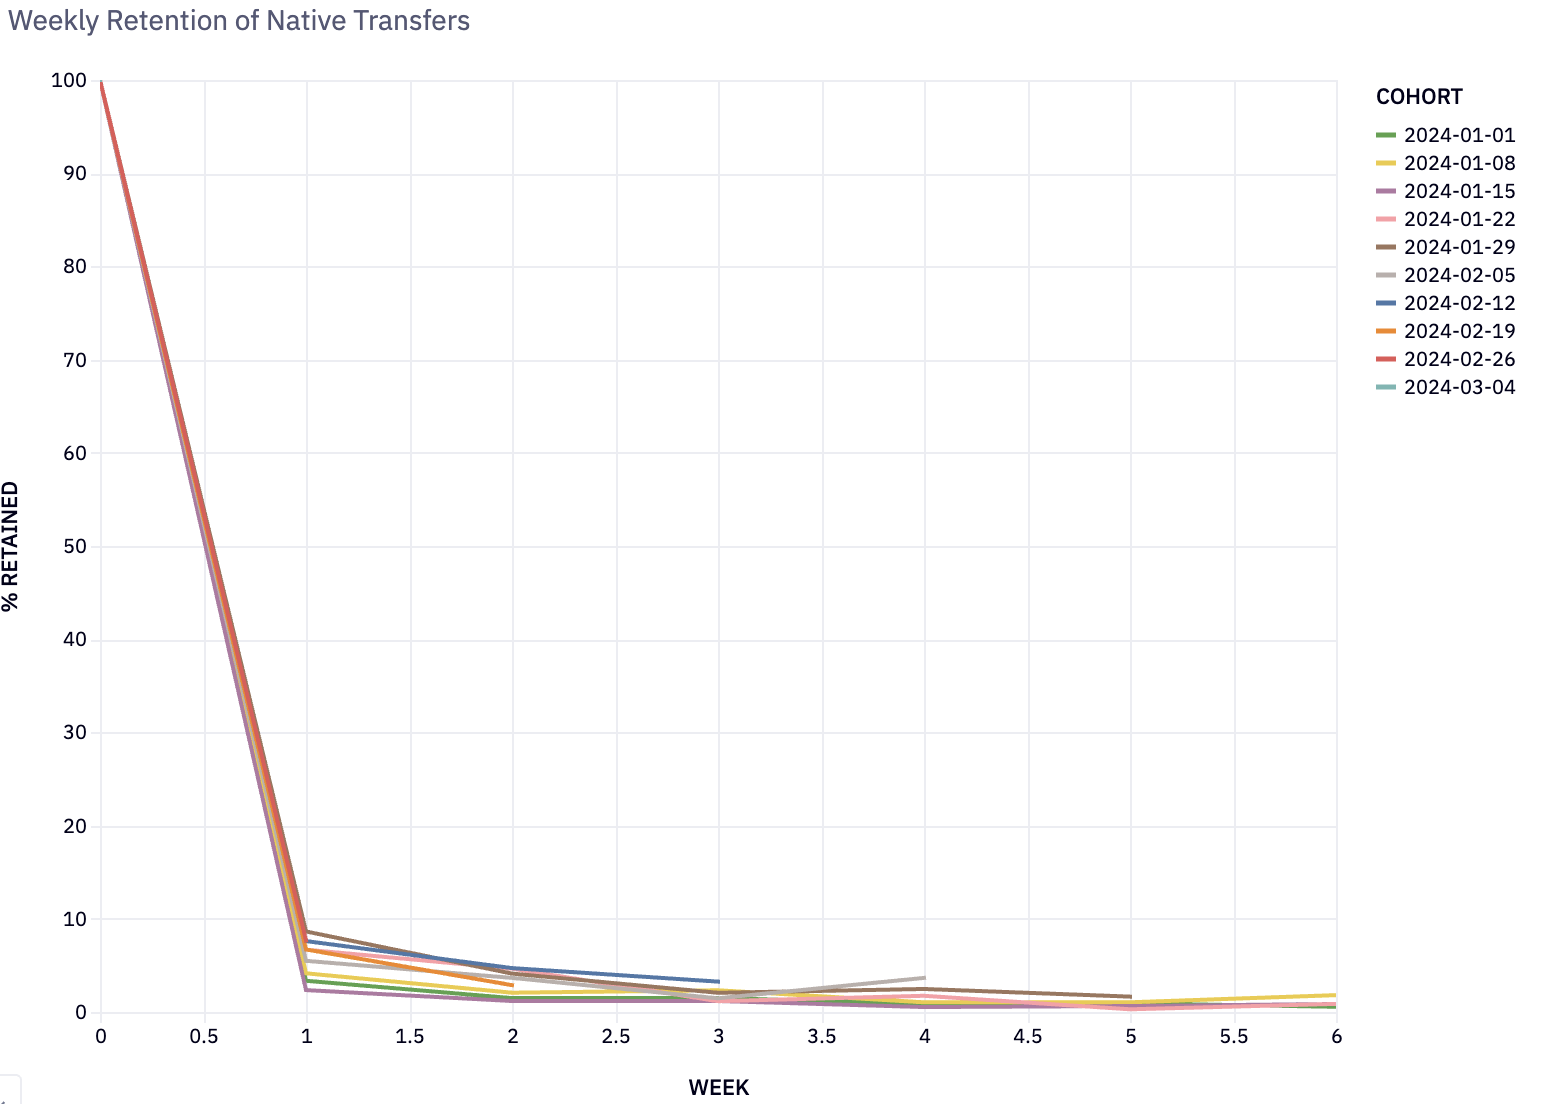 The average weekly retention of native transfer activity by ERC4337 accounts.